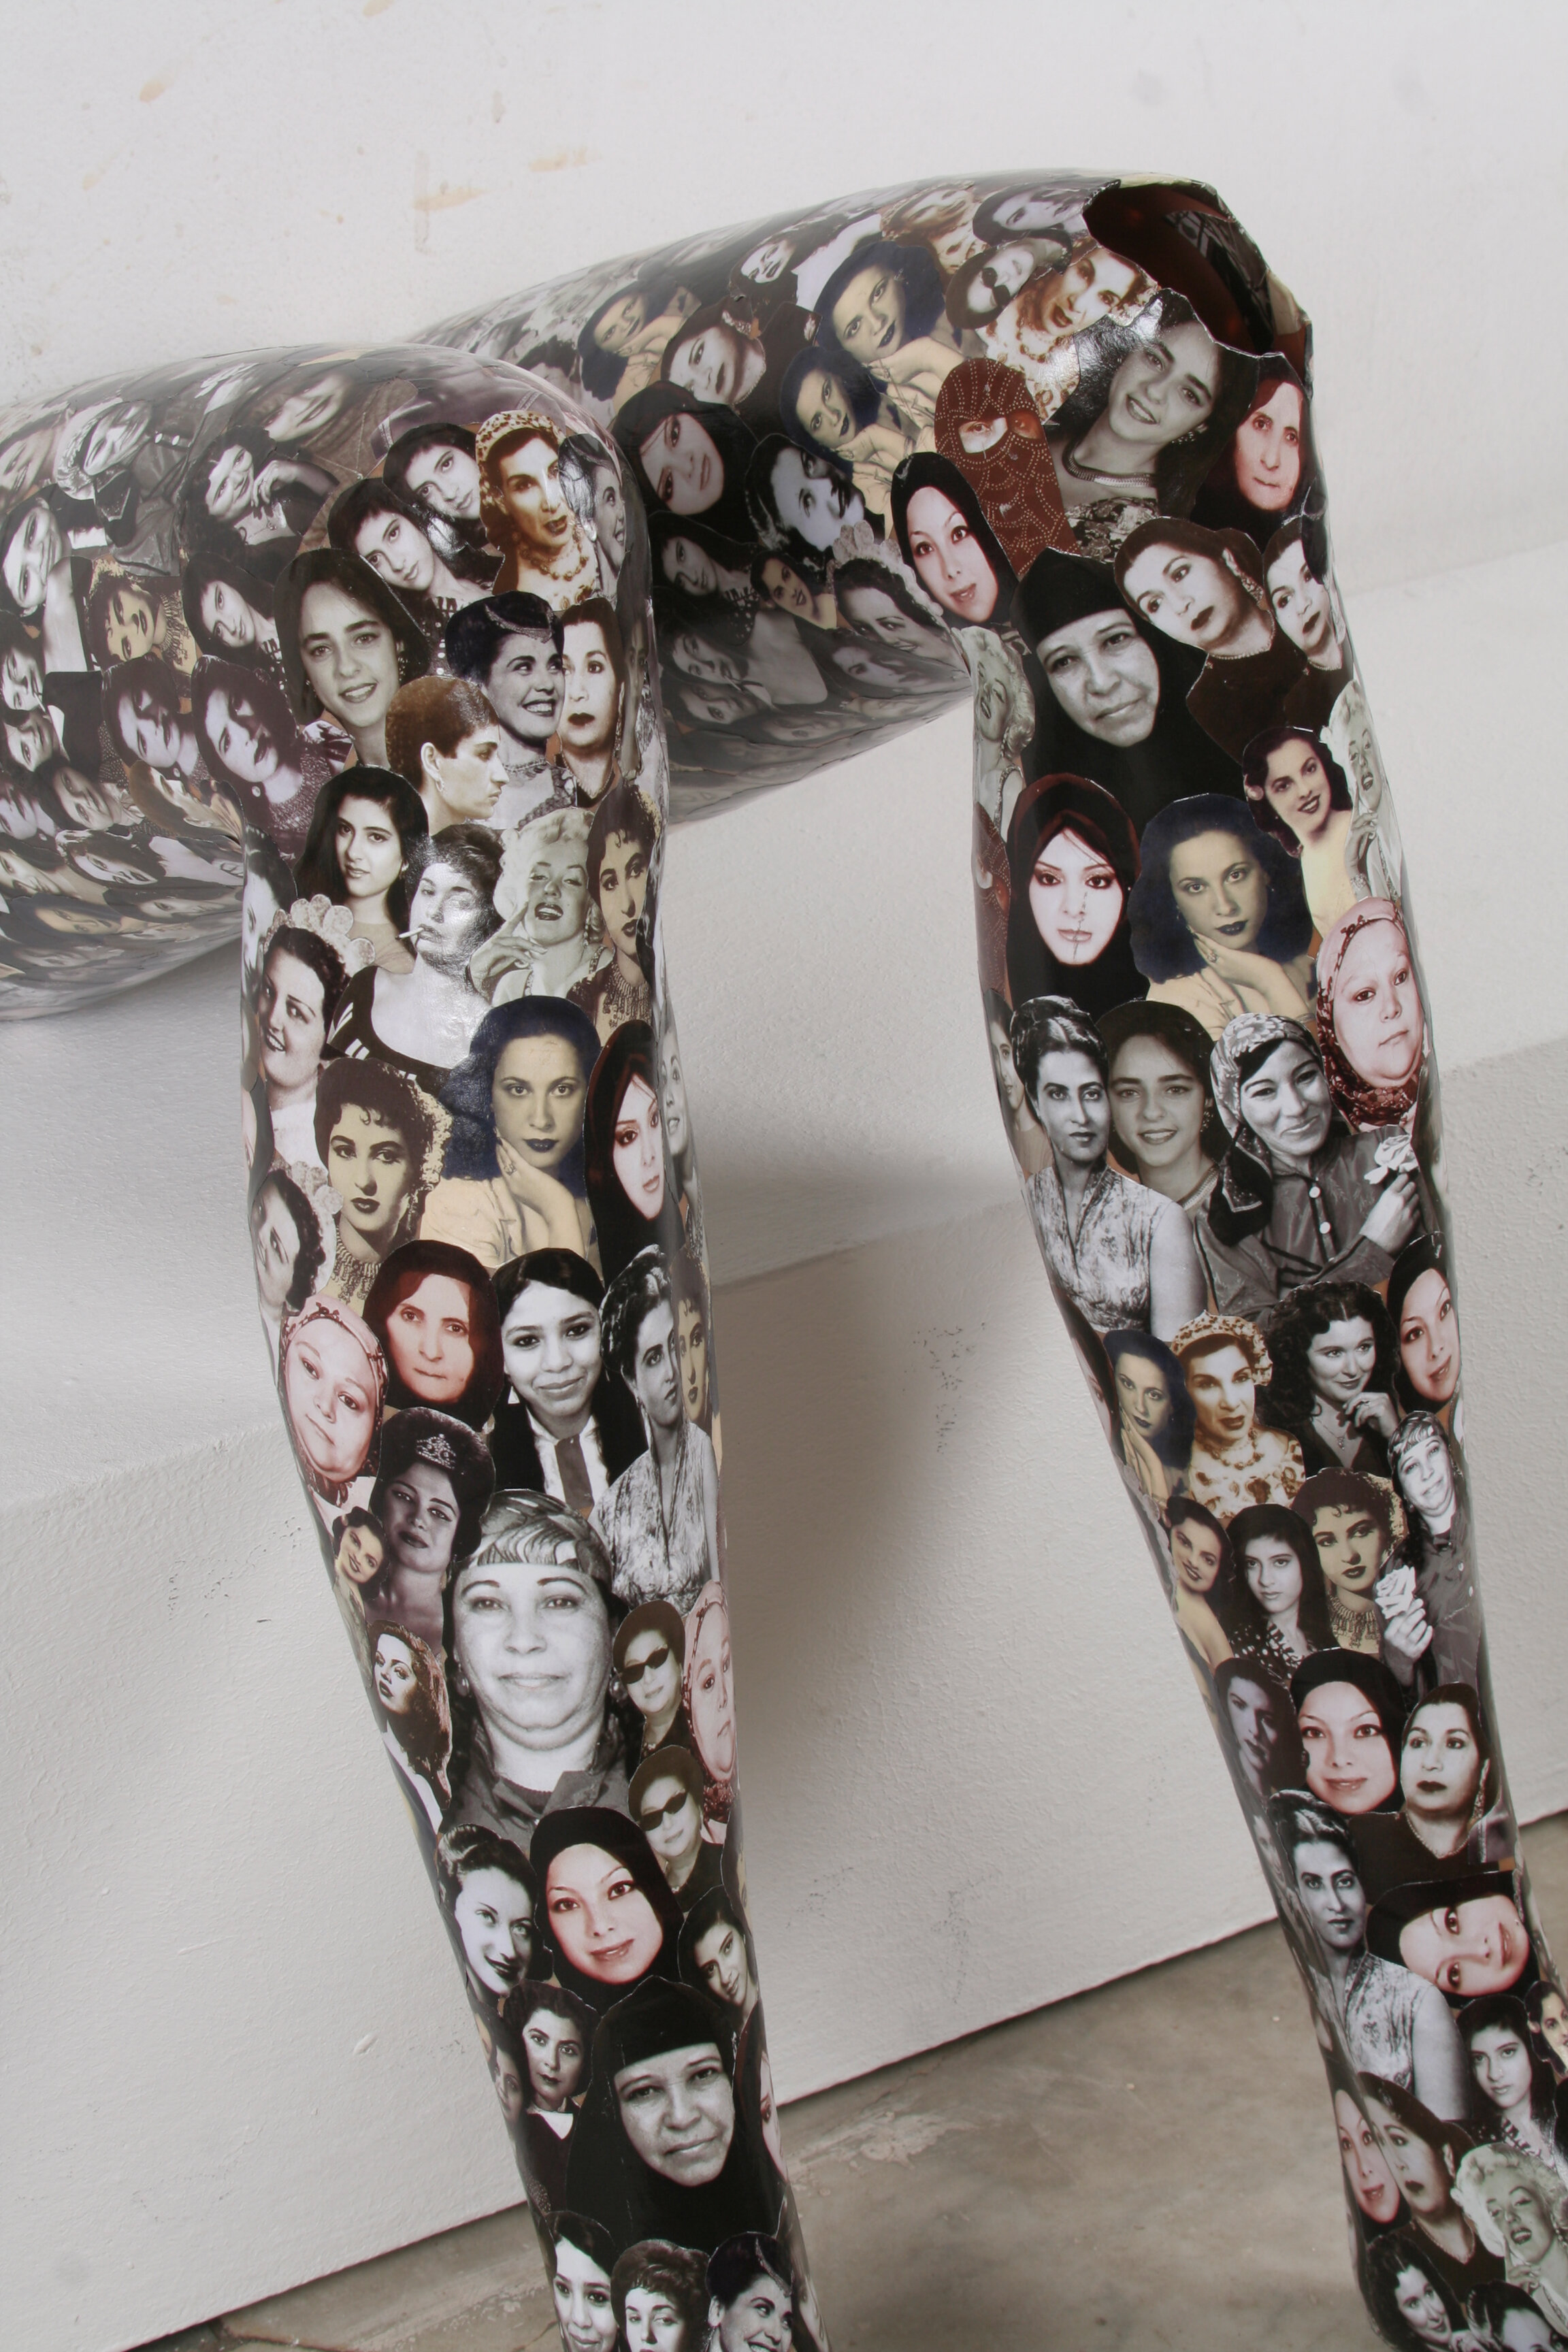  House Bound (detail), 2006, recycled mannequin legs, photo collage, 64 x 40 x 16 cm (each) 